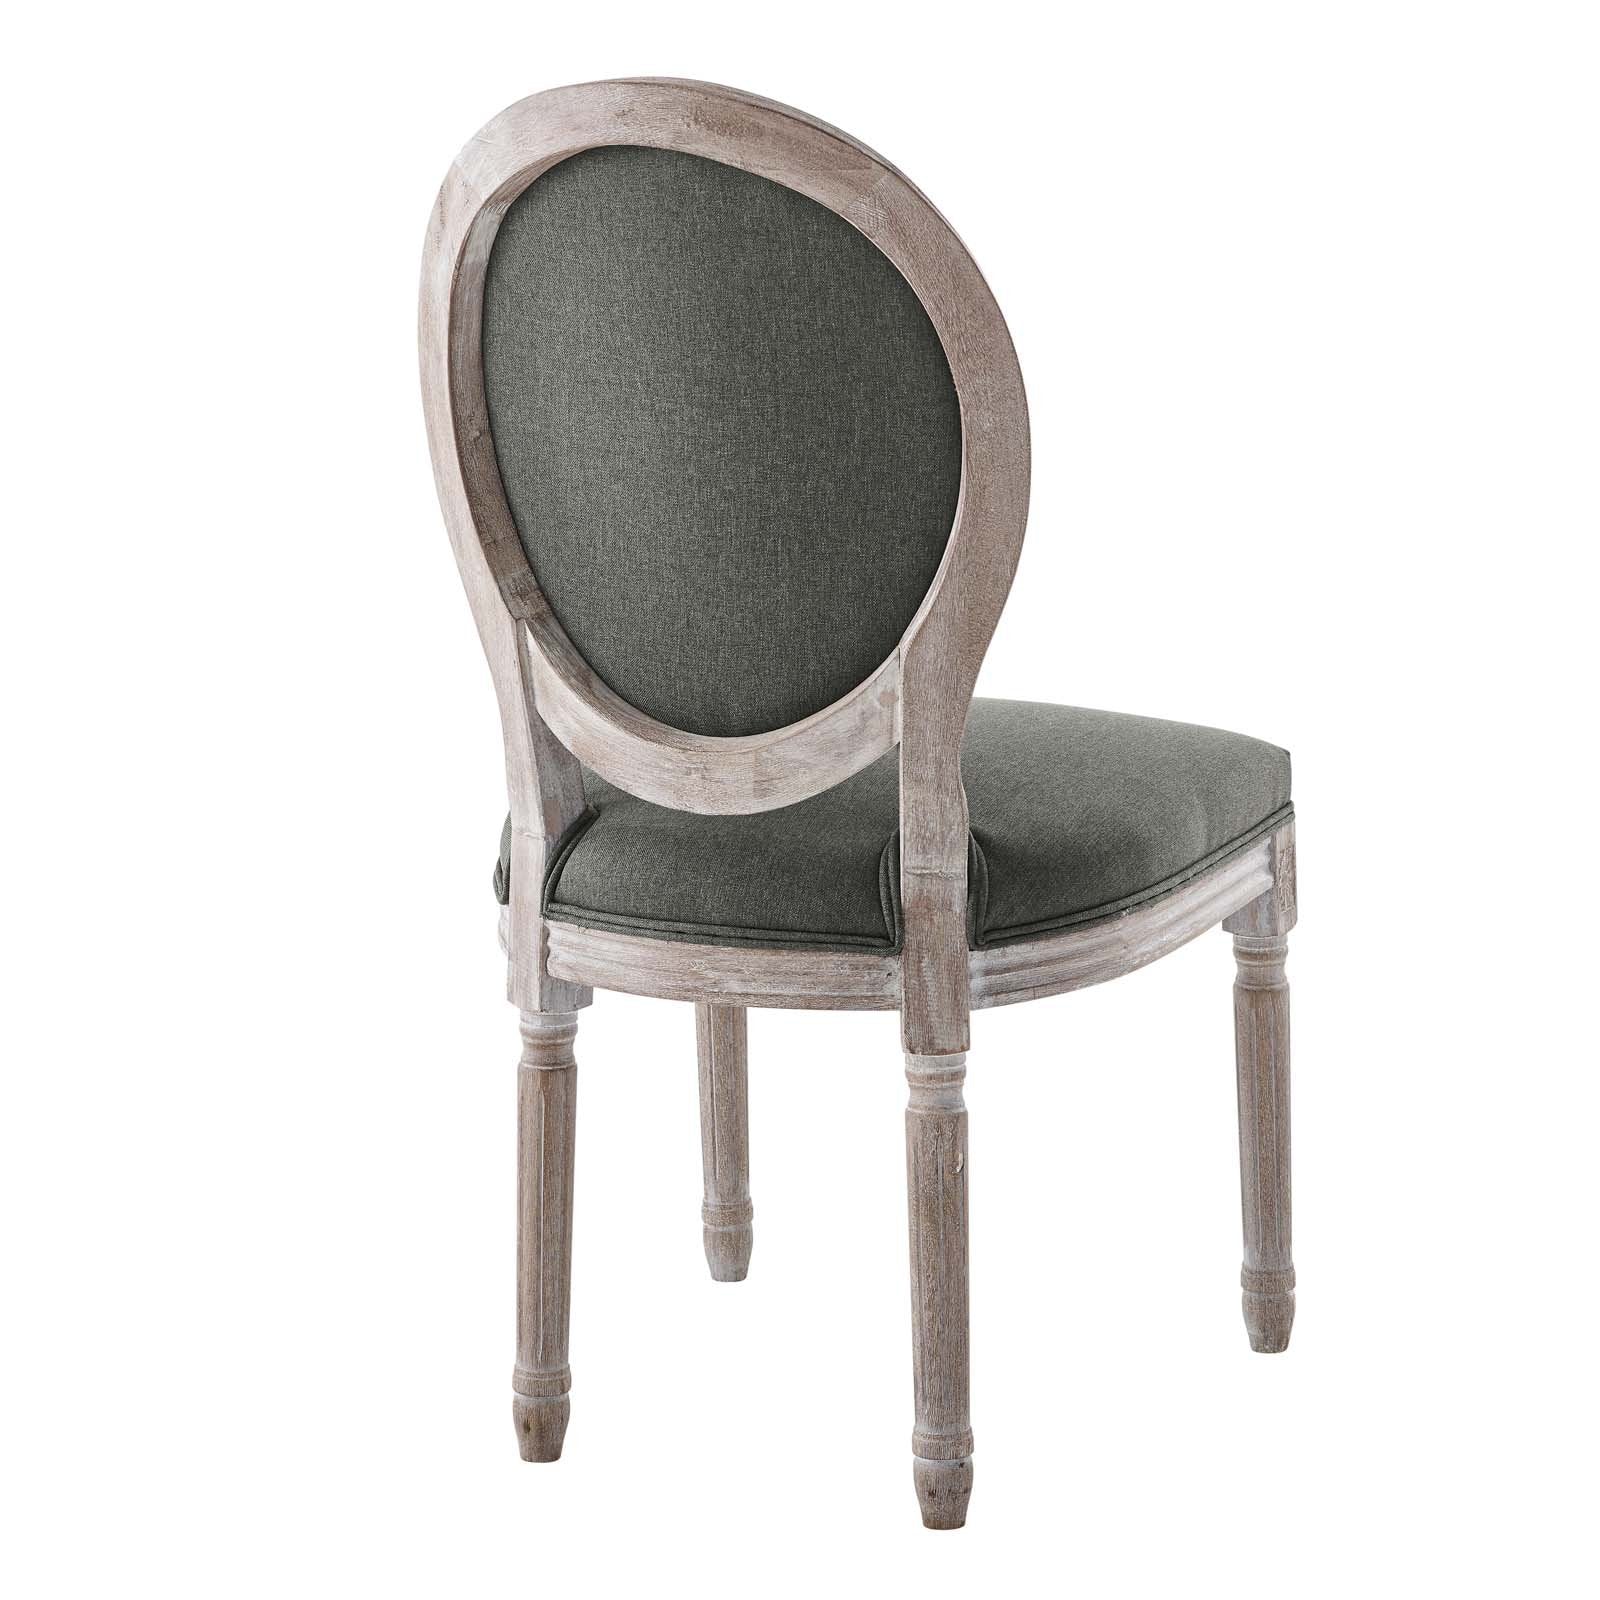 Arise Vintage French Upholstered Fabric Dining Side Chair - East Shore Modern Home Furnishings